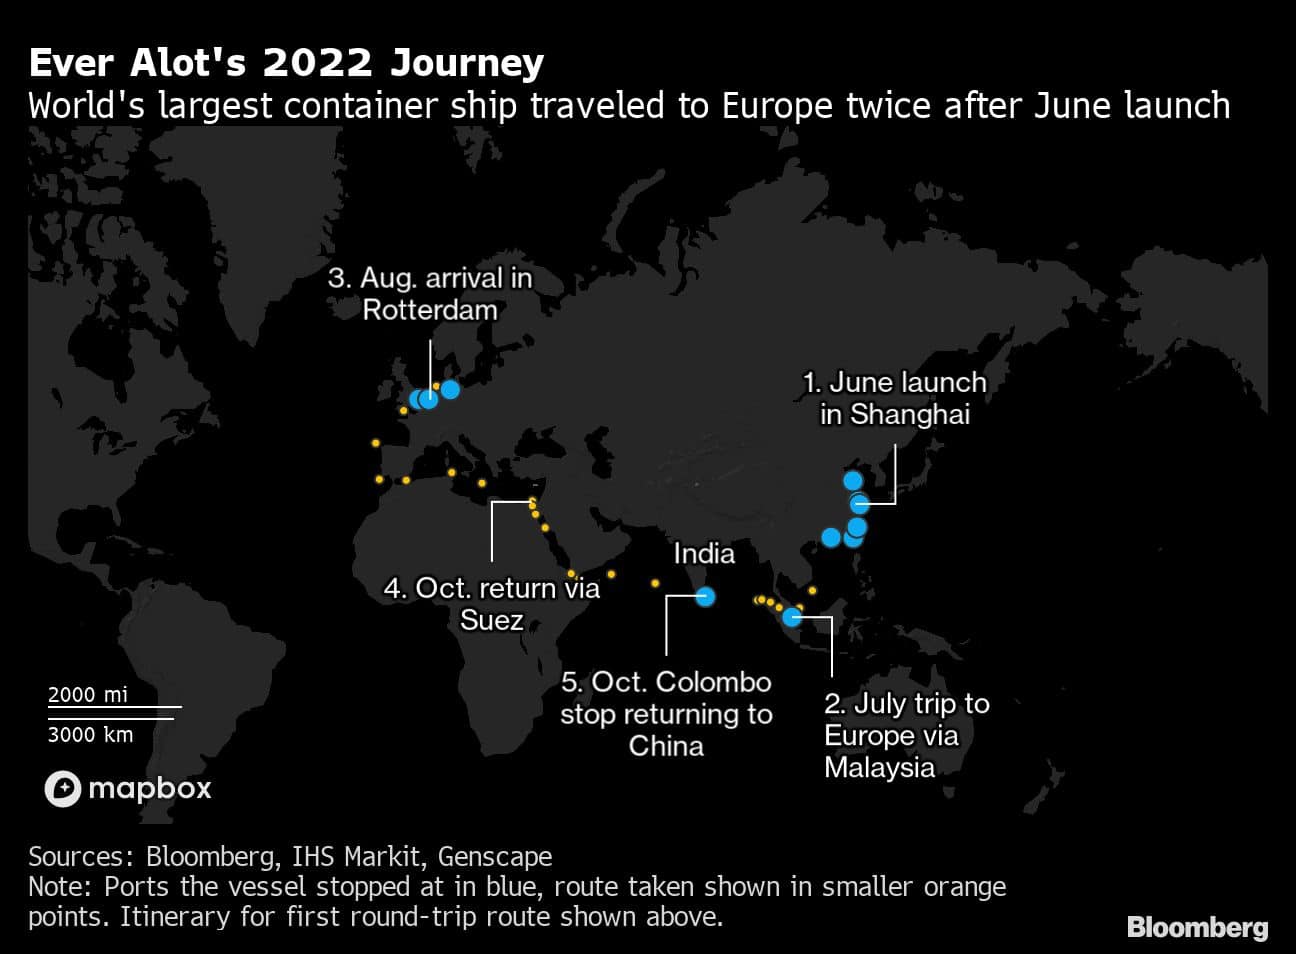 Ever Alot's 2022 Journey | World's largest container ship traveled to Europe twice after June launch